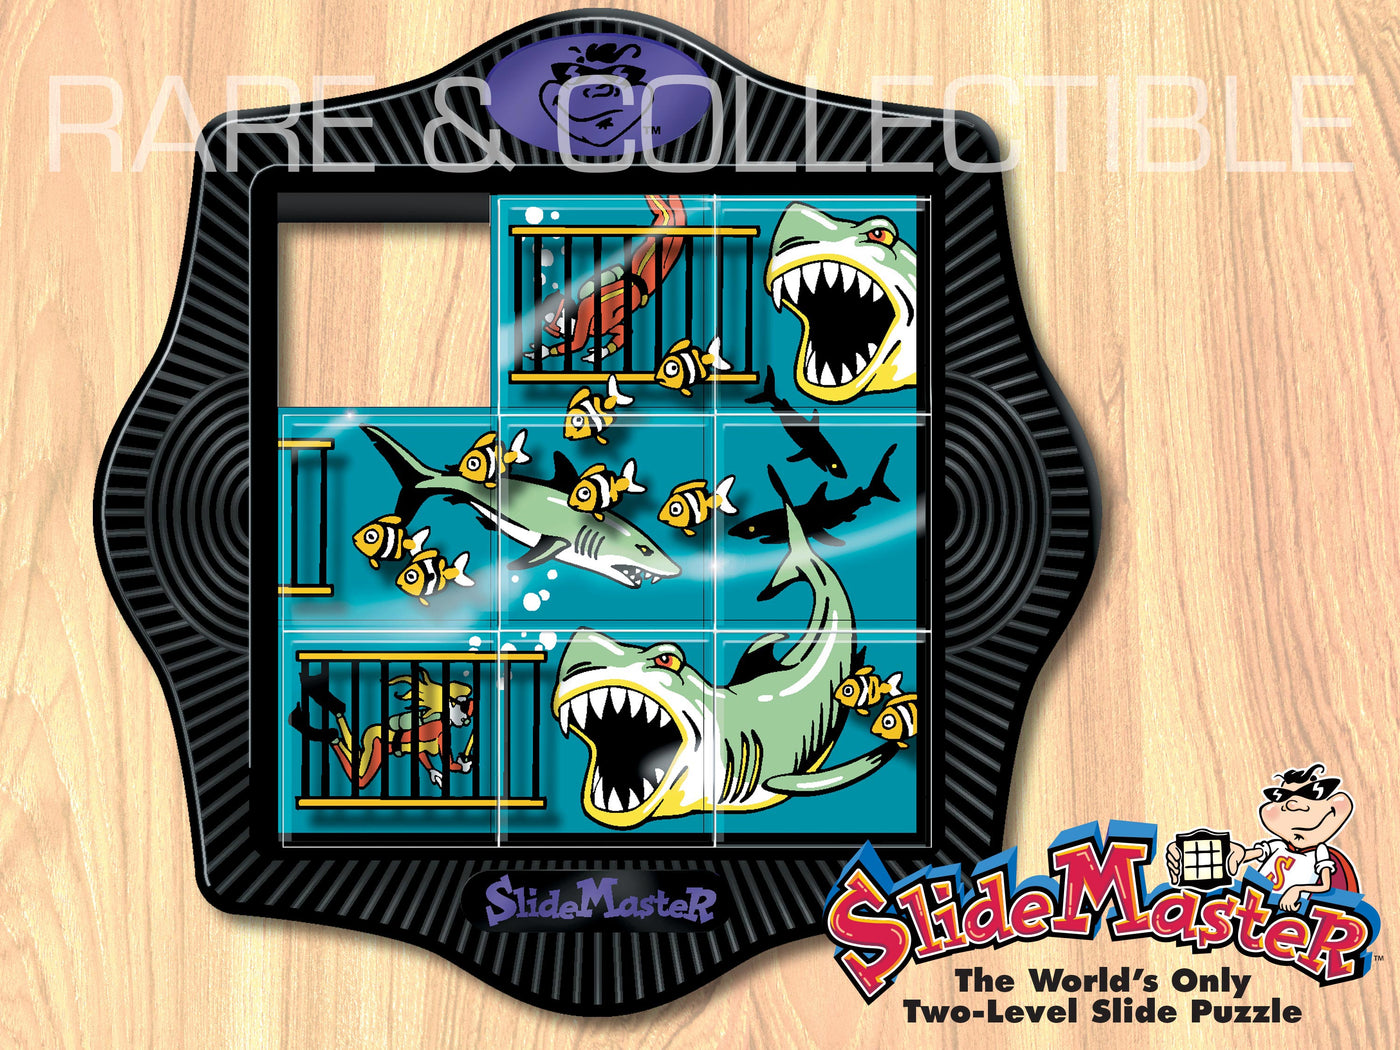 Rare and Collectable Slide Puzzle - "SlideMaster - Shark Attack" - by Dan Gilbert